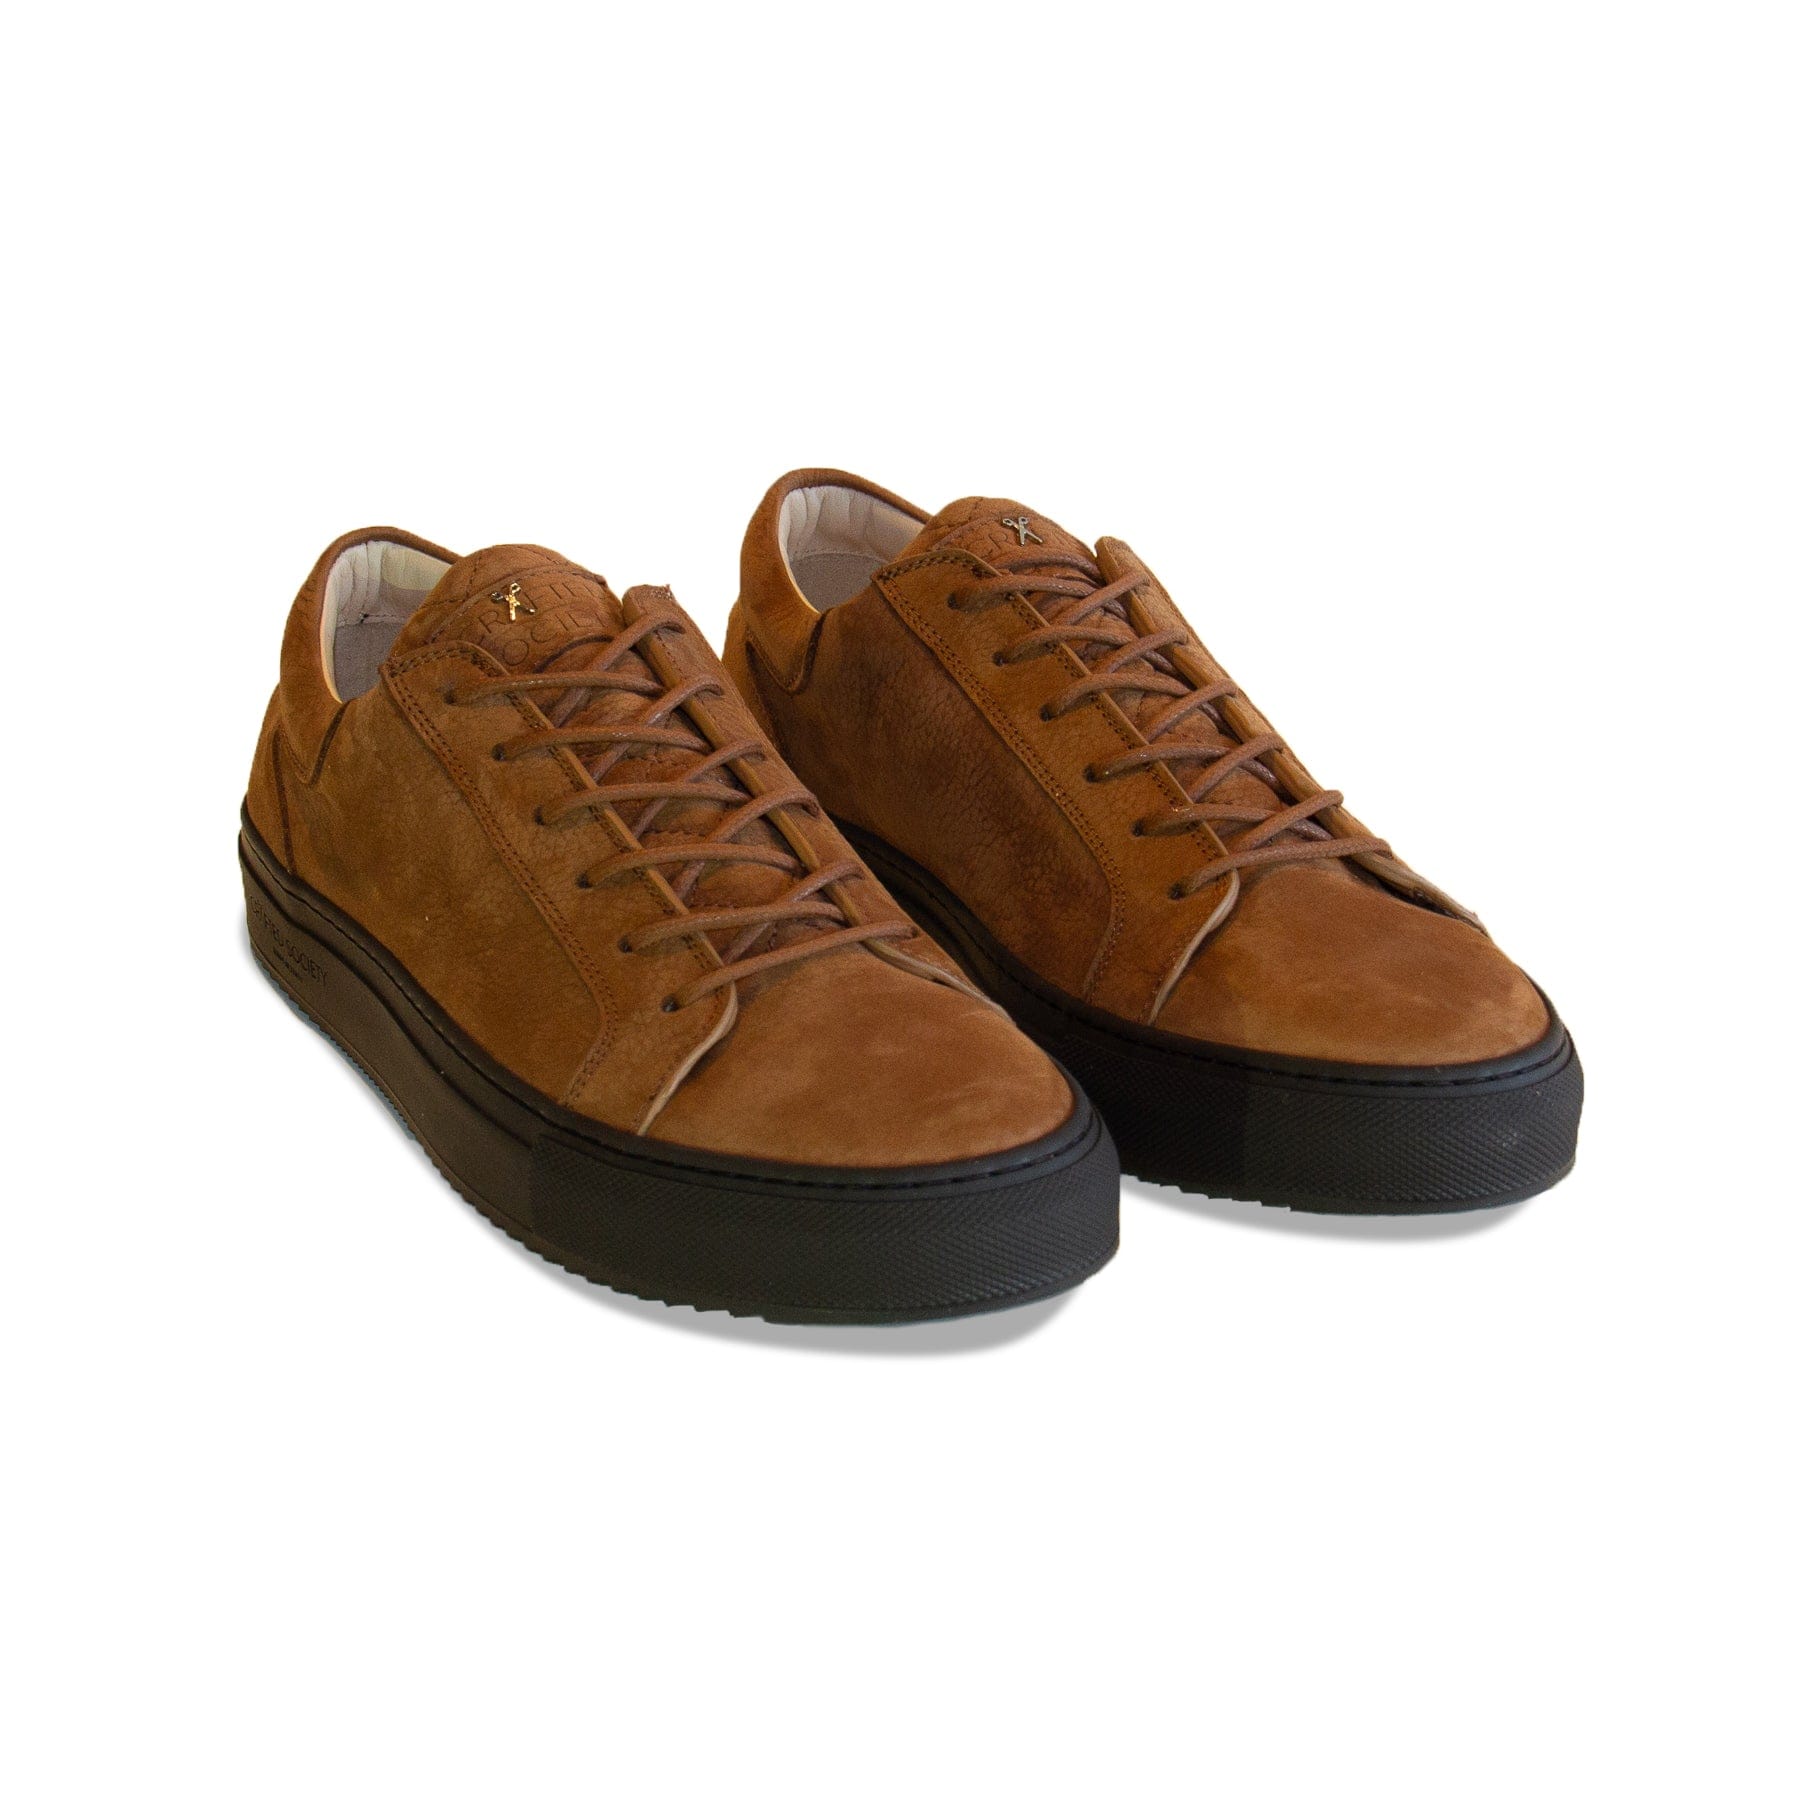 Mario Low Refined Sneaker Cognac Nubuck Chocolate Outsole Frontview